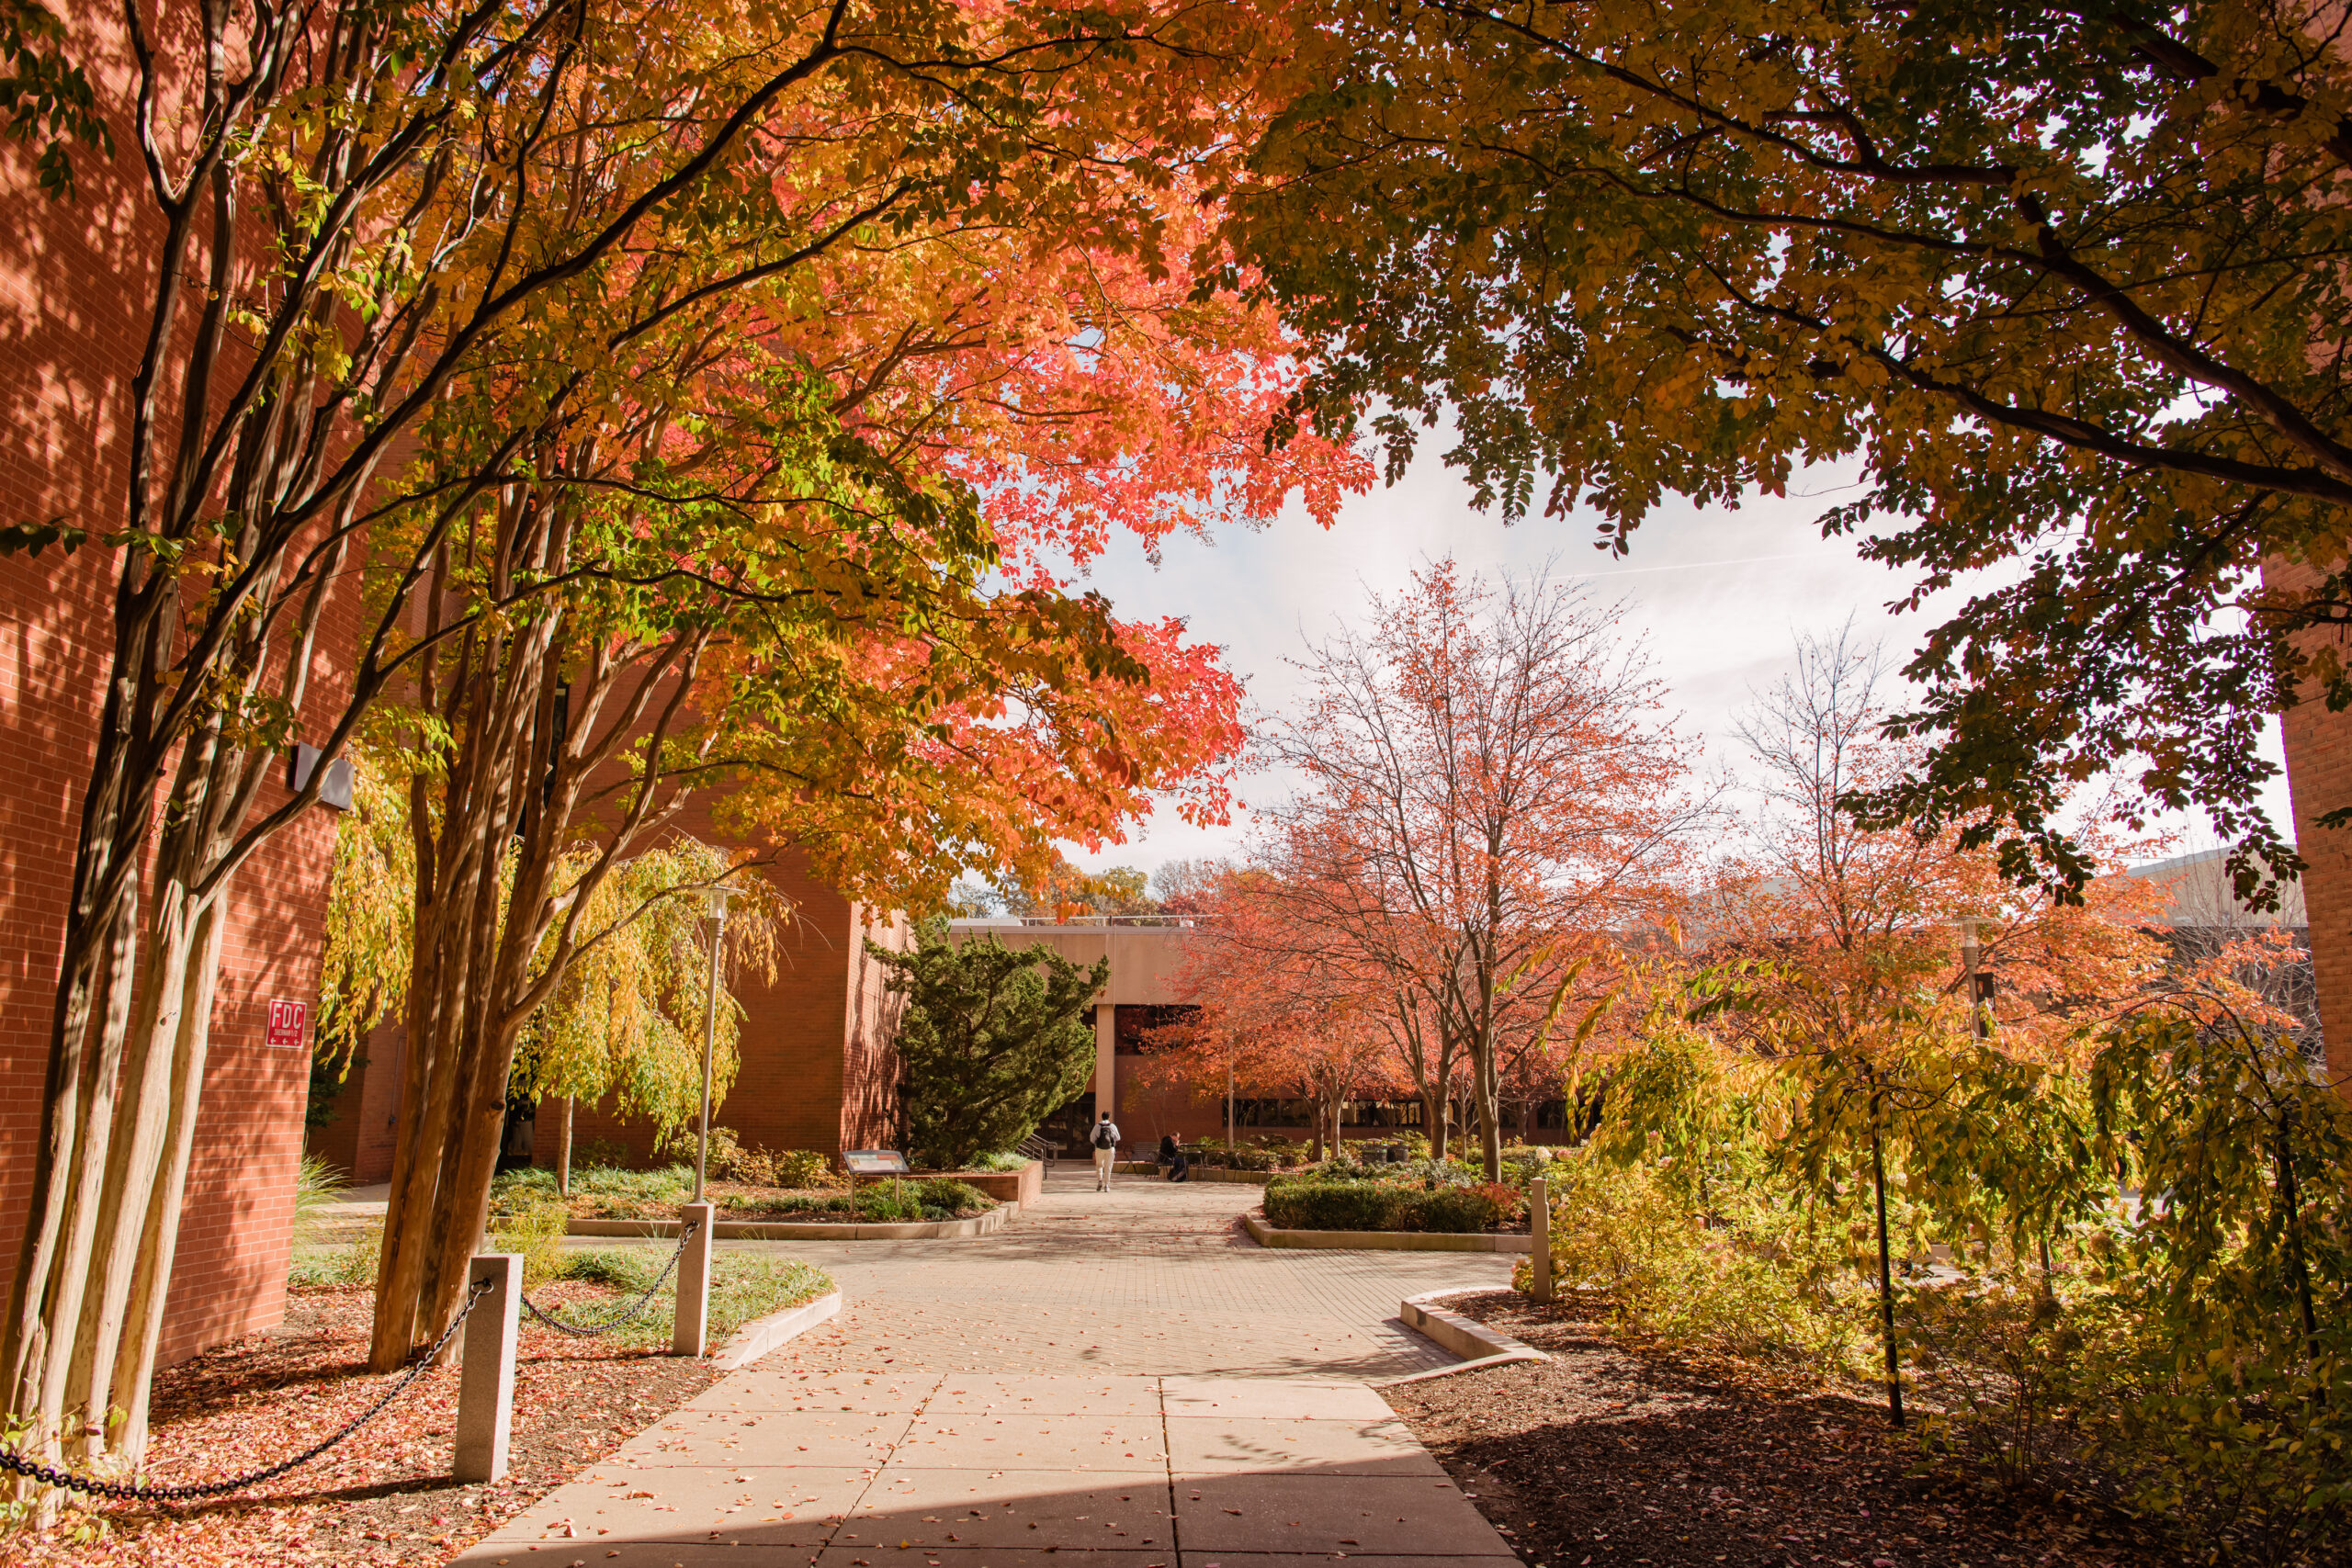 Top 6 ways to celebrate (a slightly spine-chilling) autumn at UMBC